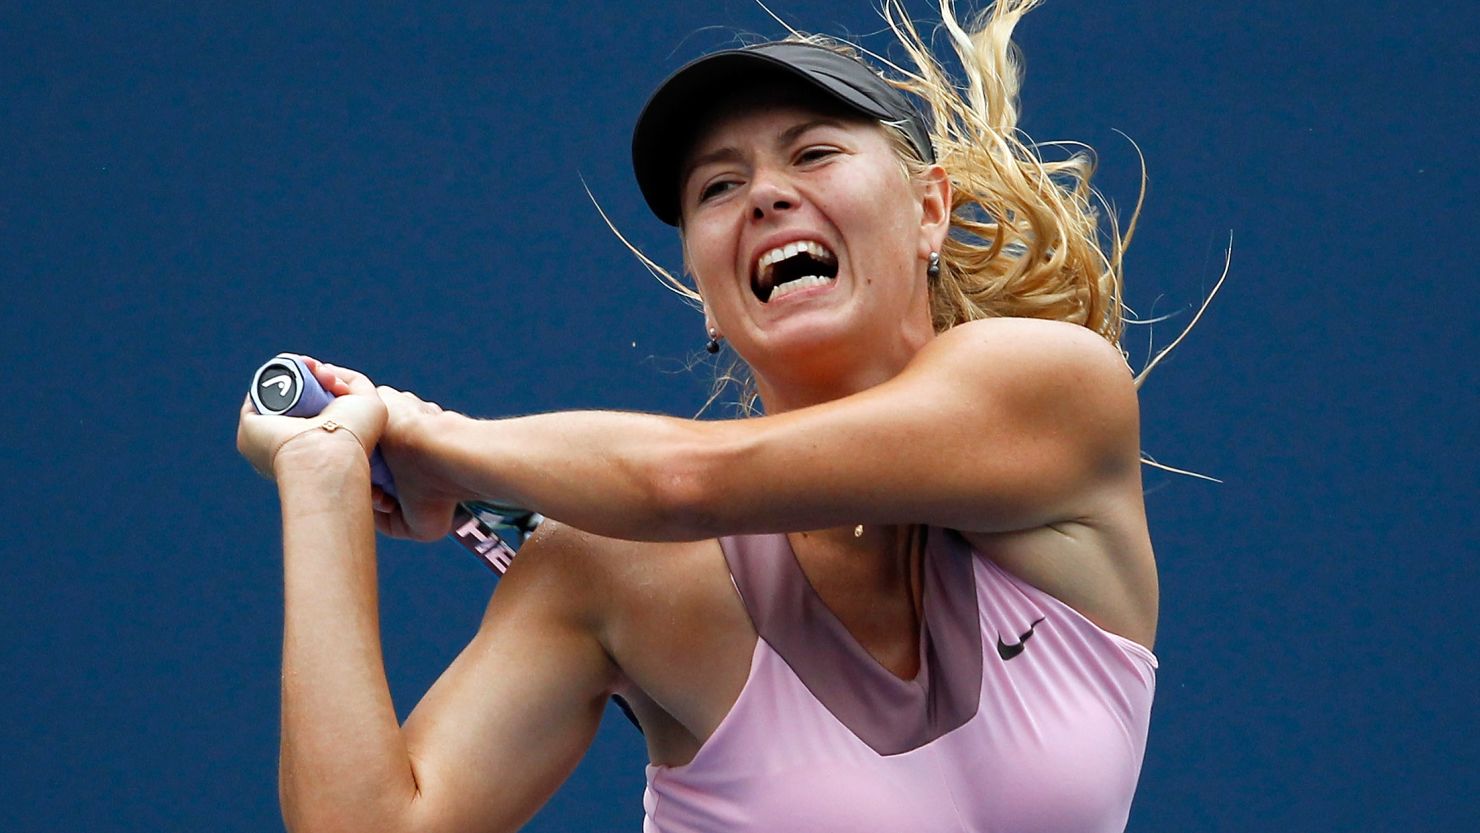 Maria Sharapova turns up the heat during her quarterfinal victory over Marion Bartoli at the U.S. Open. 